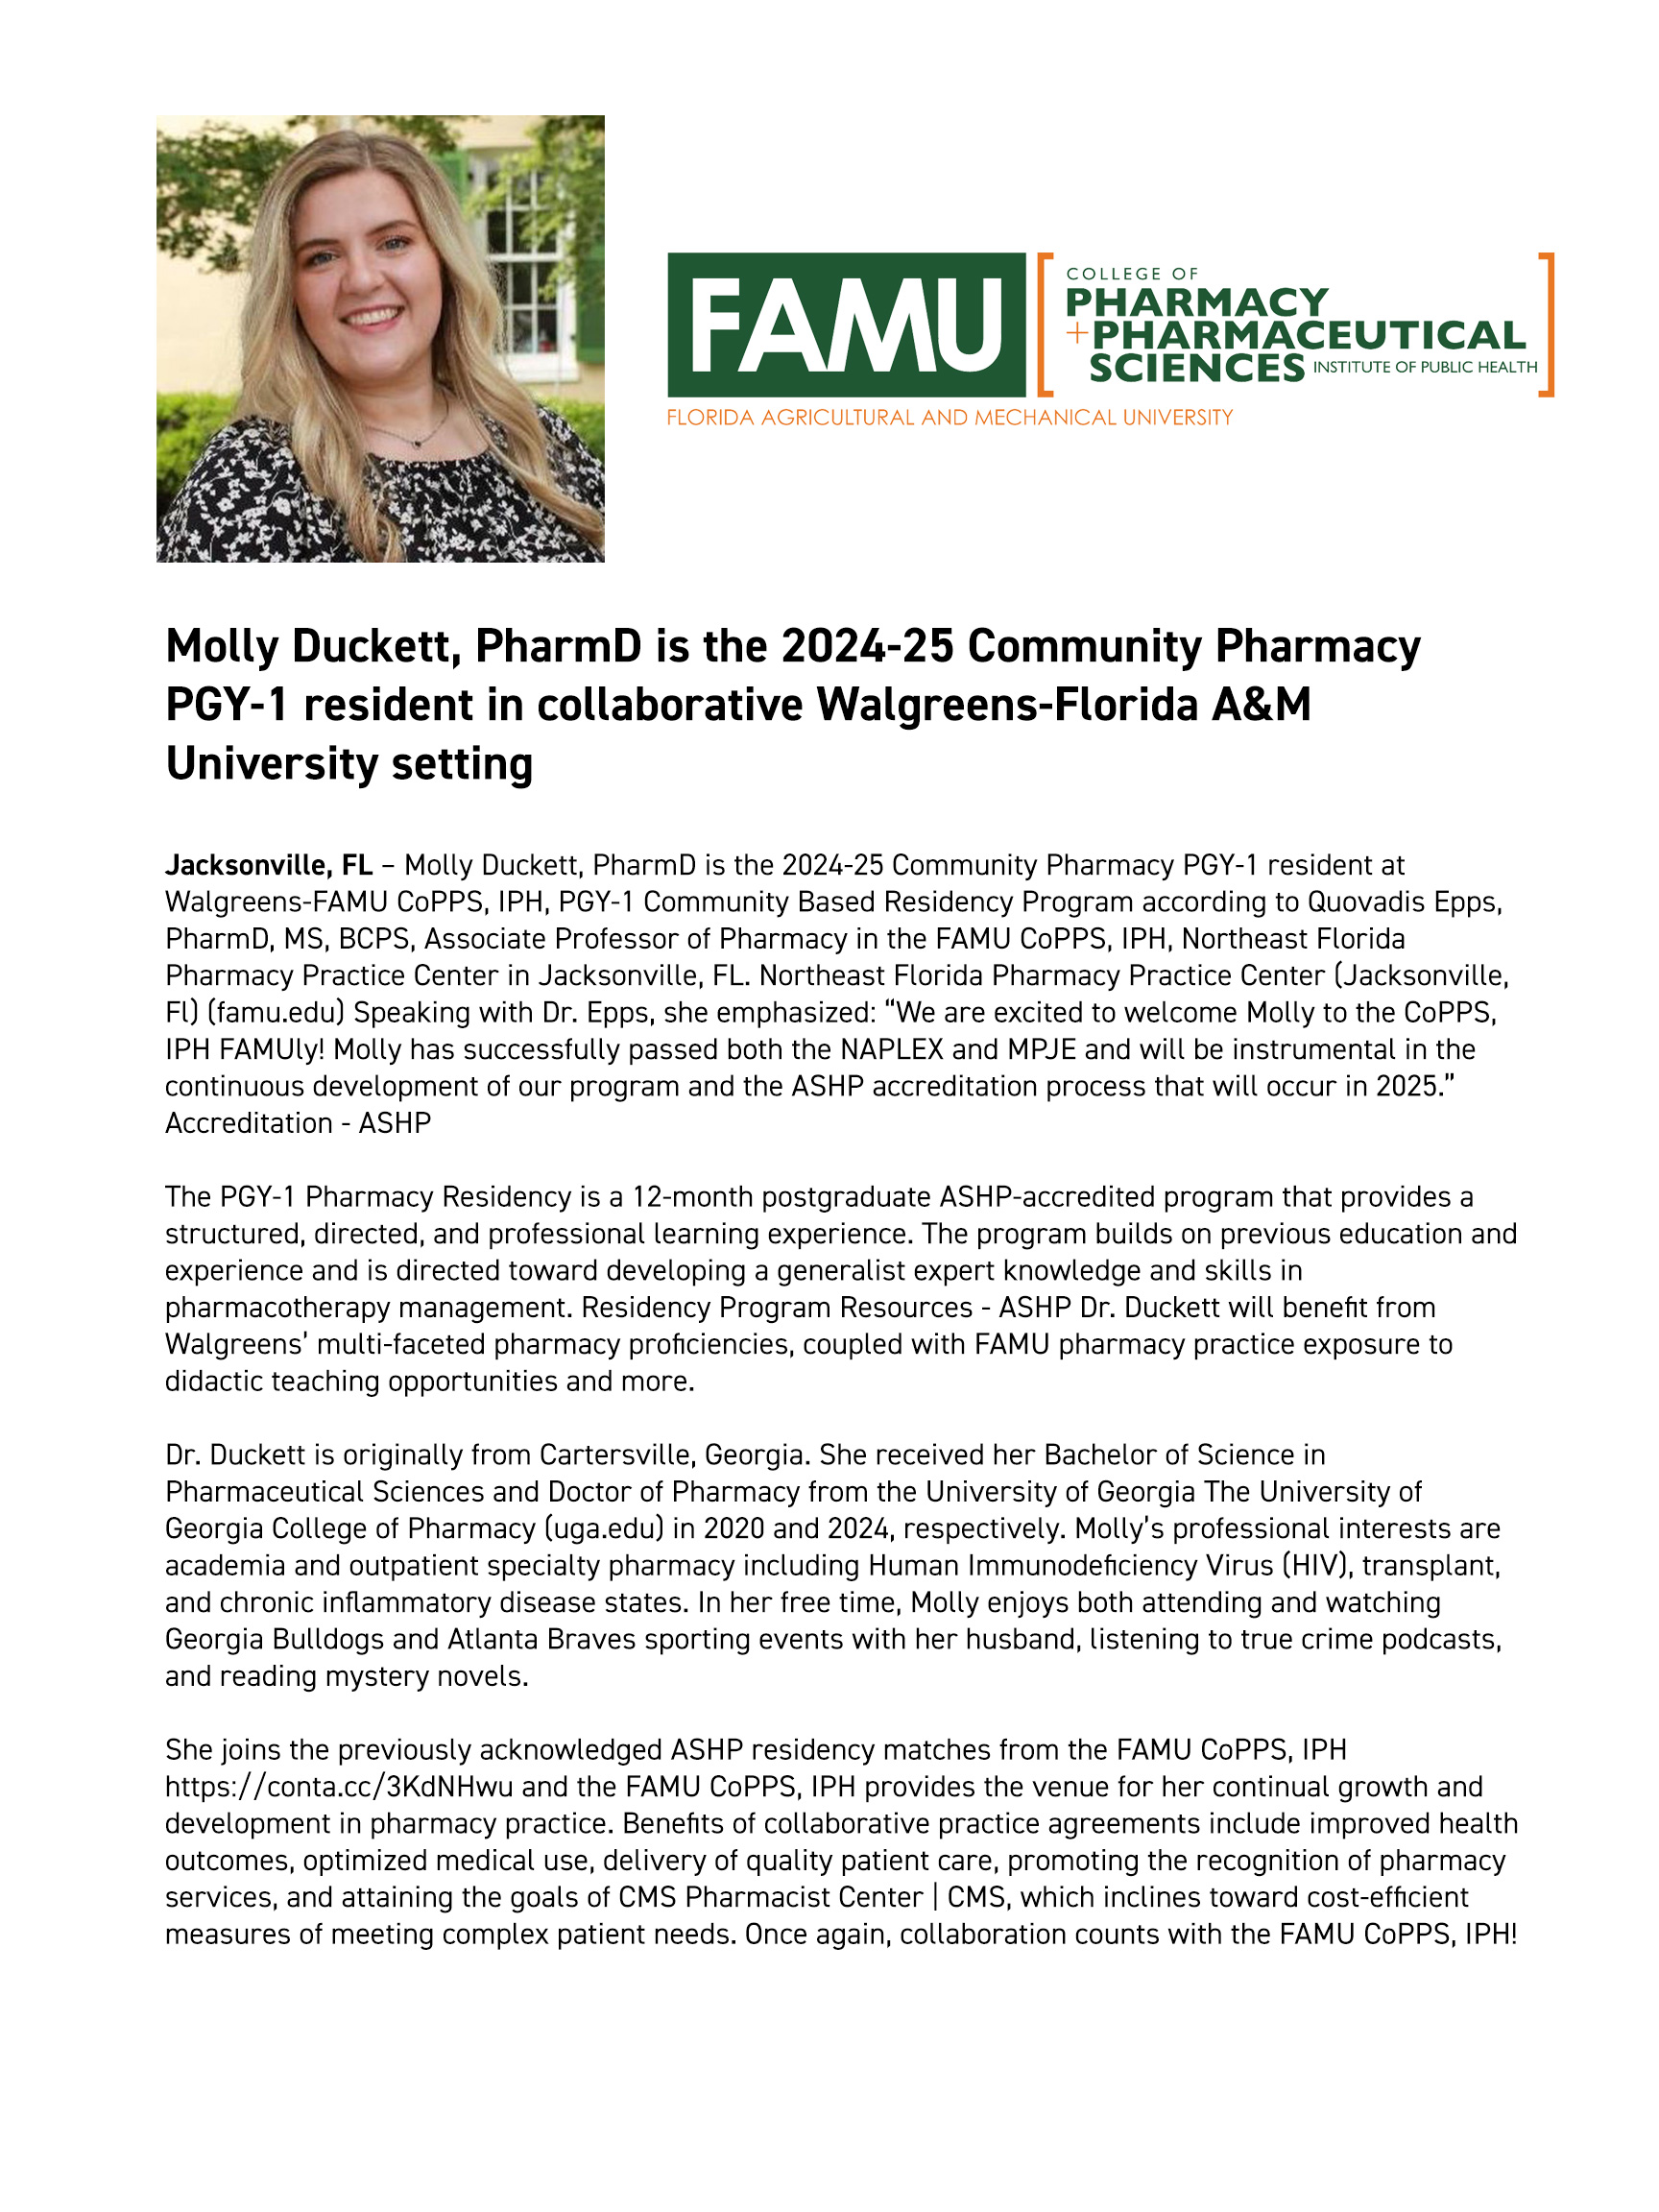 Molly Duckett, PharmD is the 2024-25 Community Pharmacy PGY-1 resident in collaborative Walgreens-Florida A&M University setting 